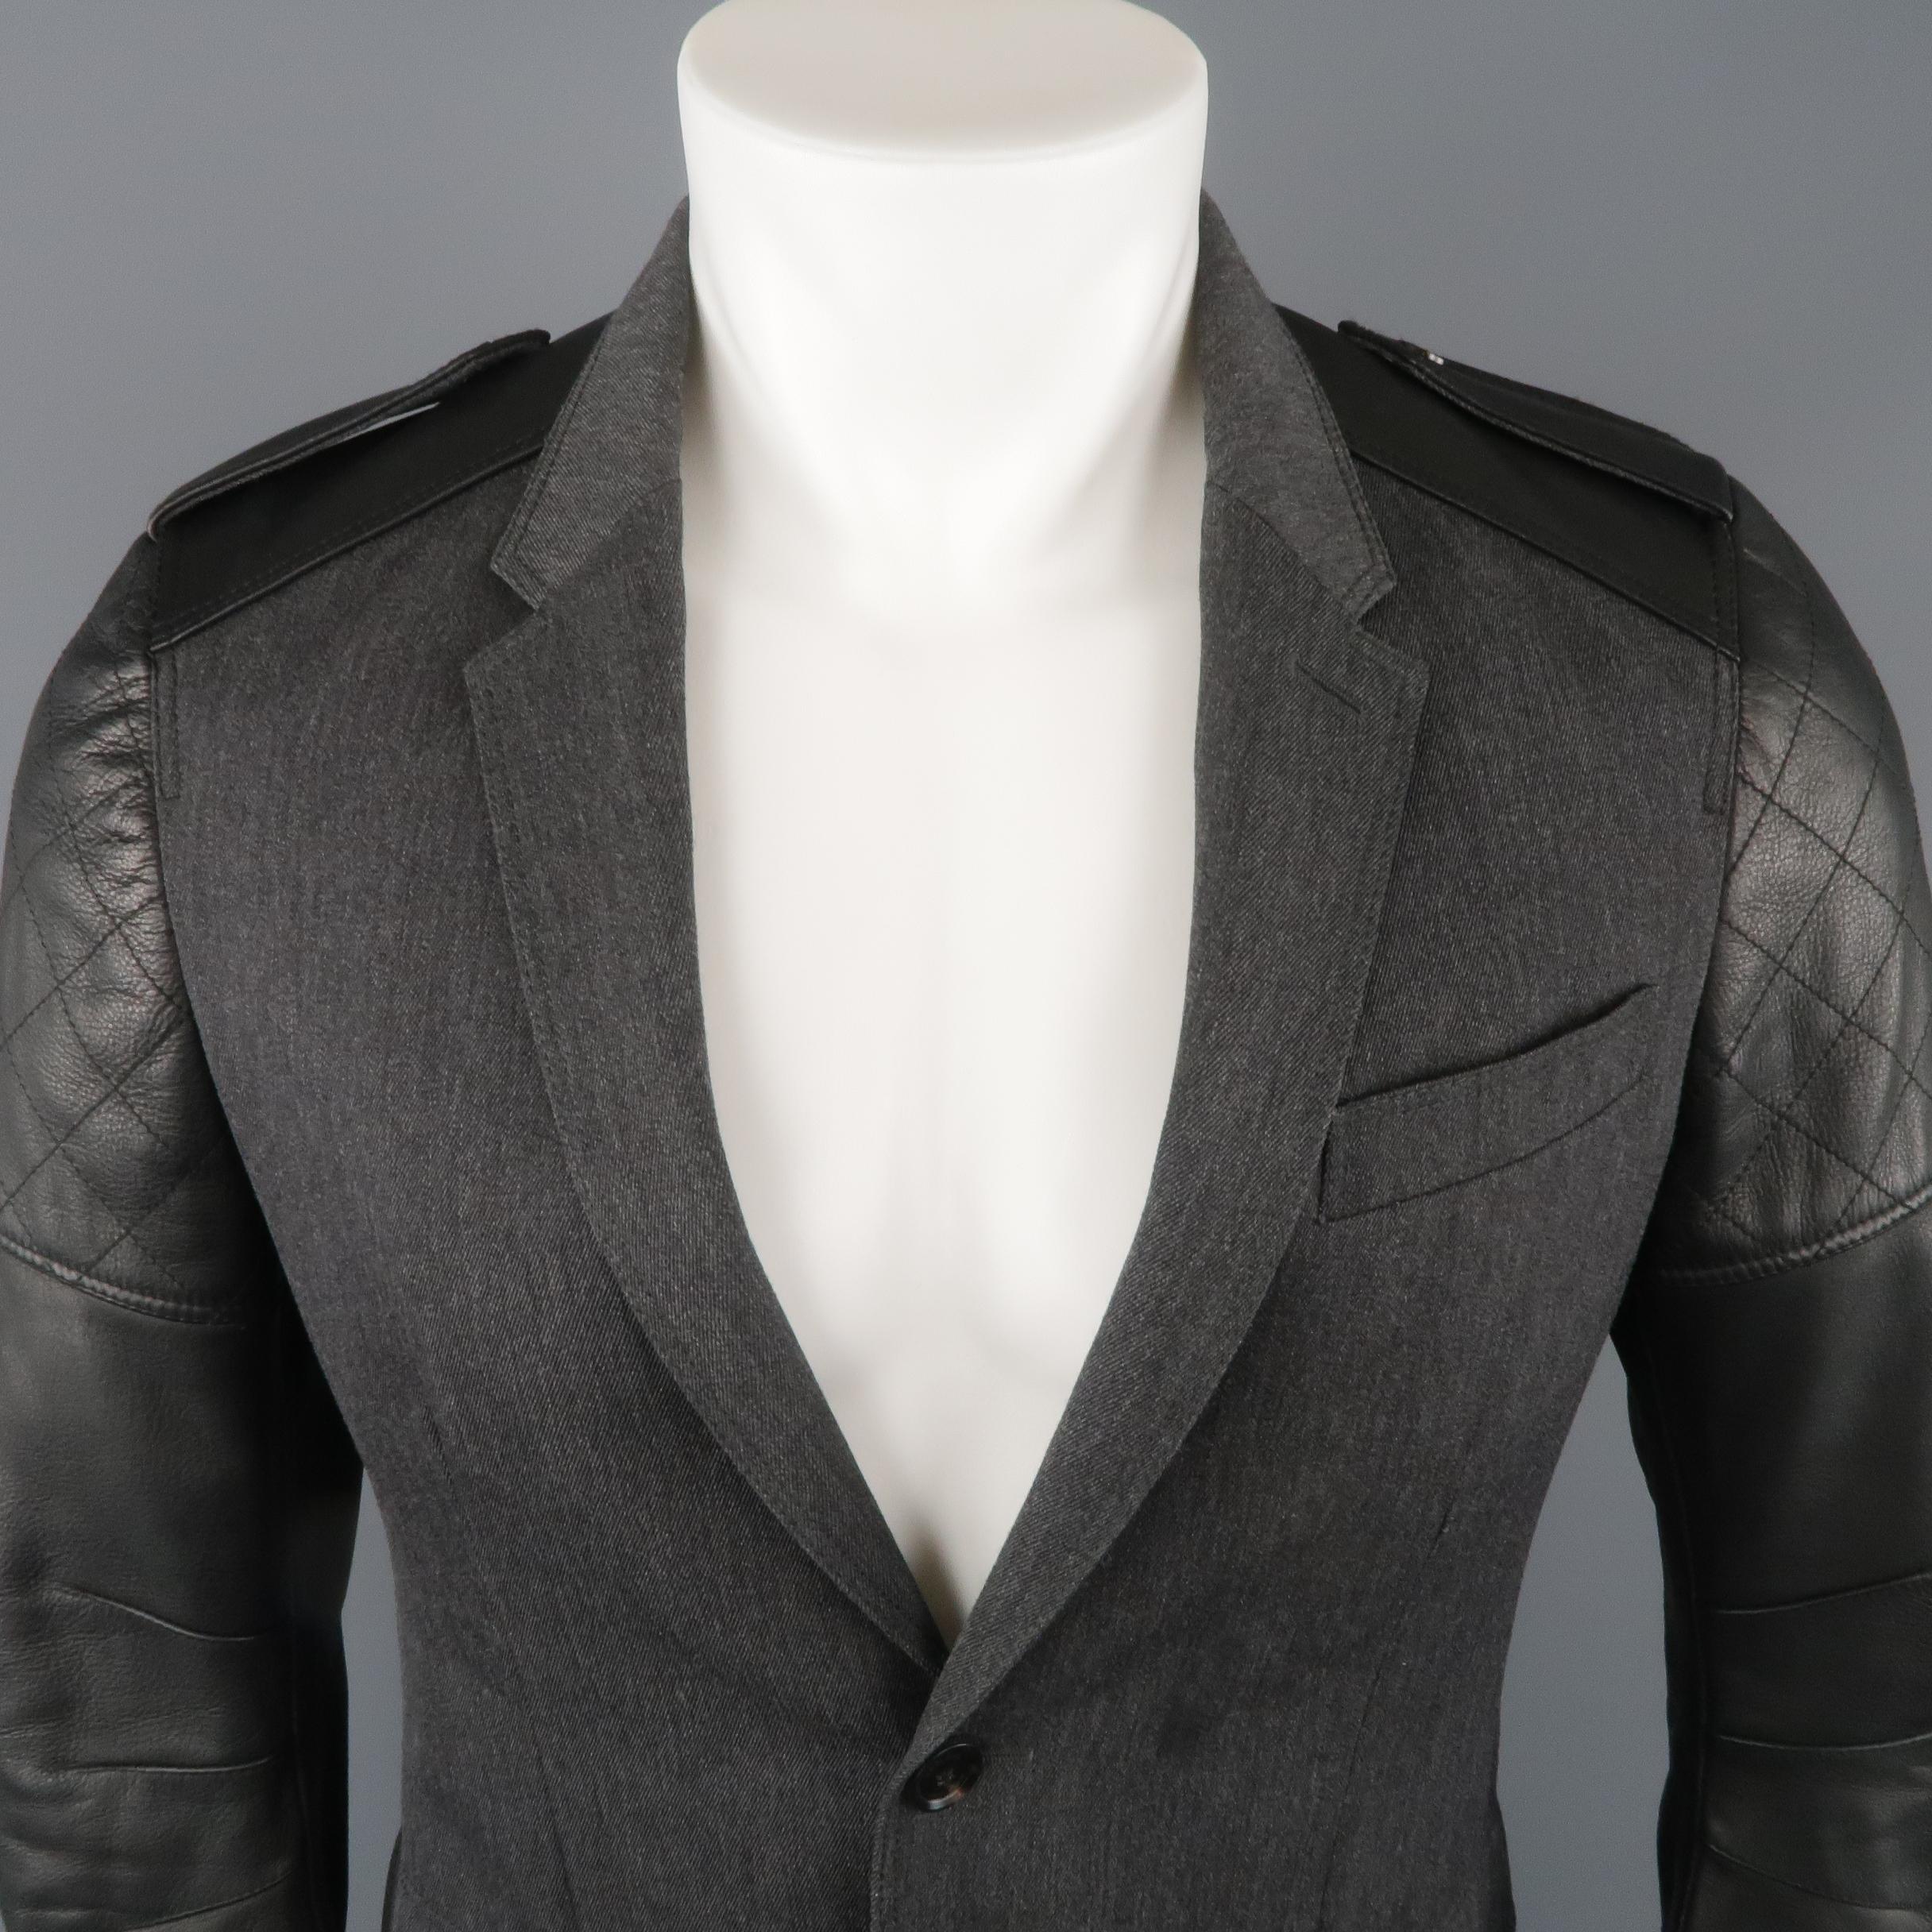 BELSTAFF sport coat jacket comes in gray wool twill with a notch lapel, single breasted two button front, flap snap pockets, and leather biker jacket sleeves with epaulets. Made in Italy.
 
New with Tags.
Marked: IT 48
 
Measurements:
 
Shoulder: 16